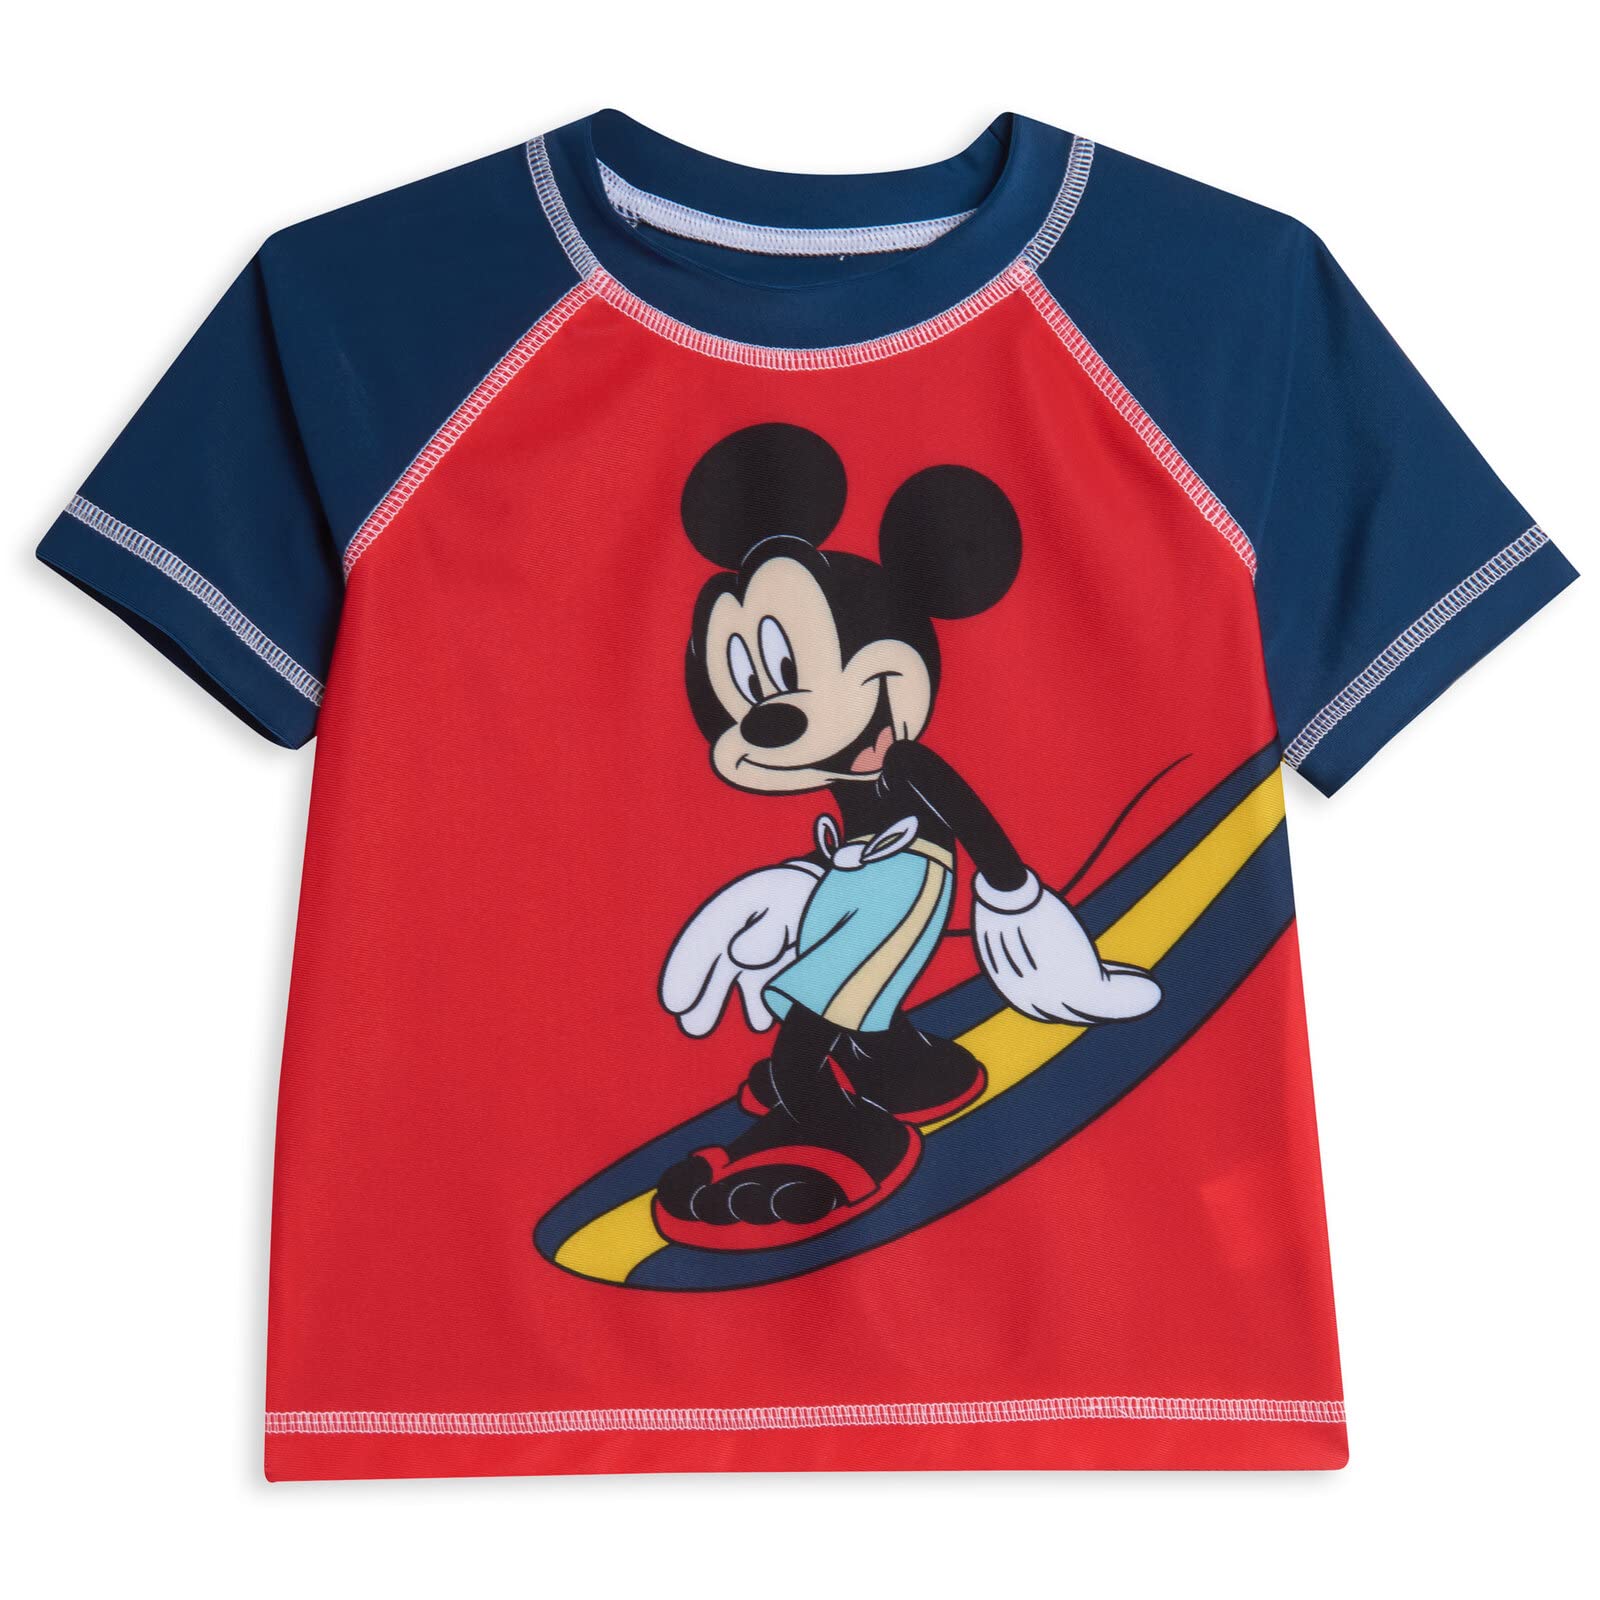 Disney Mickey Mouse Rash Guard and Swim Trunks Outfit Set Infant to Toddler